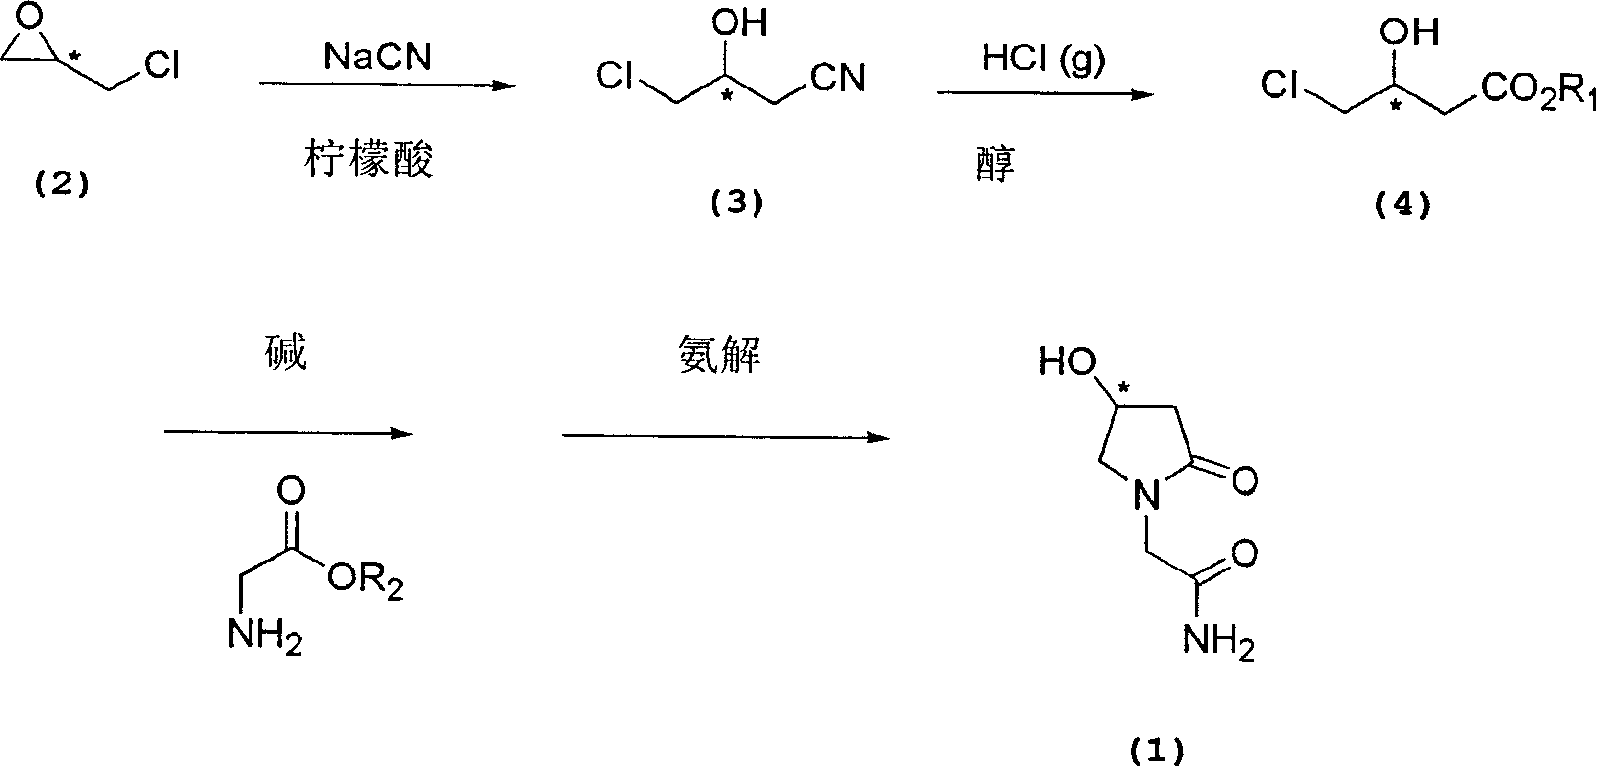 Process for the preparation of optically pure 4-hydroxy-2-oxo-1-pyrrolidine acetamide